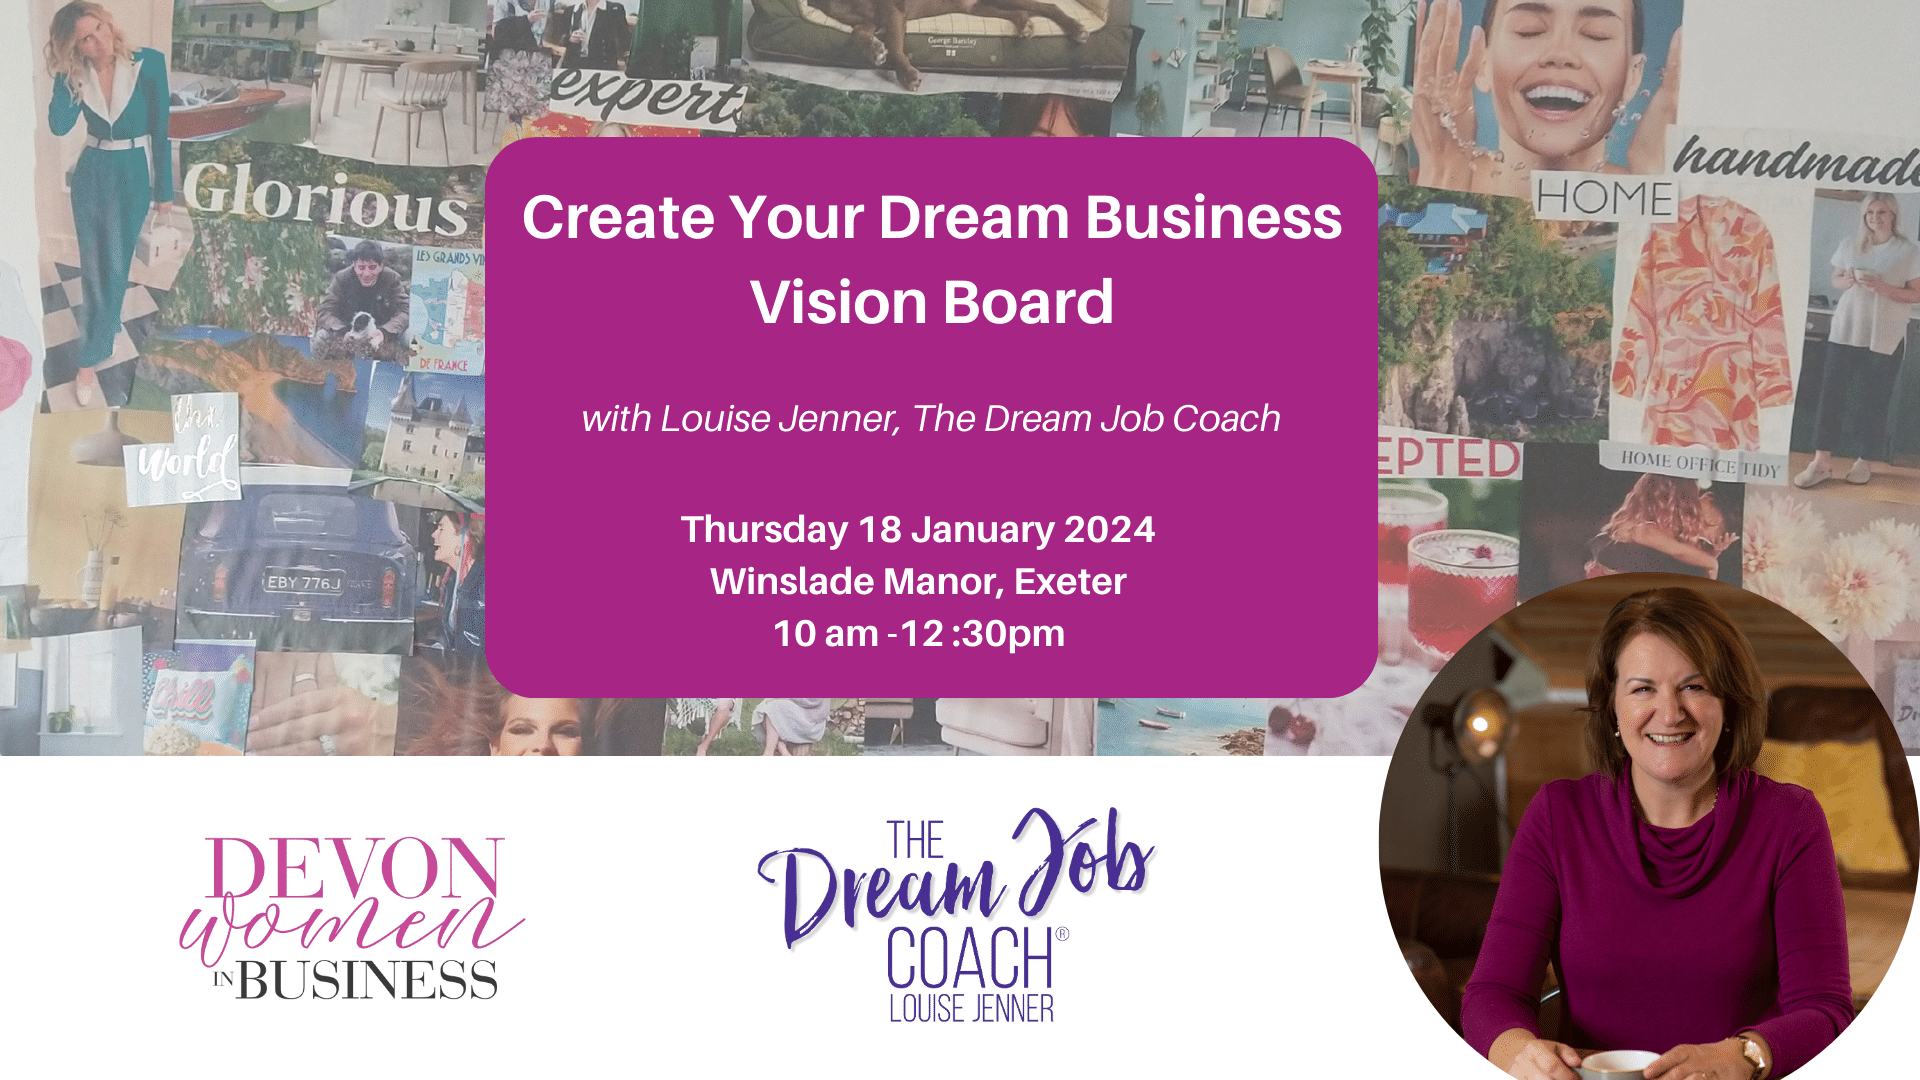 Create Your Dream Business Vision Board with Louise Jenner, The Dream Job Coach. Tuesday 21st November 10 am -12 pm Logos: Devon Women in Business Louise Jenner The Dream Job Coach Background photo of a vision board. Inset photo of Louise Jenner.